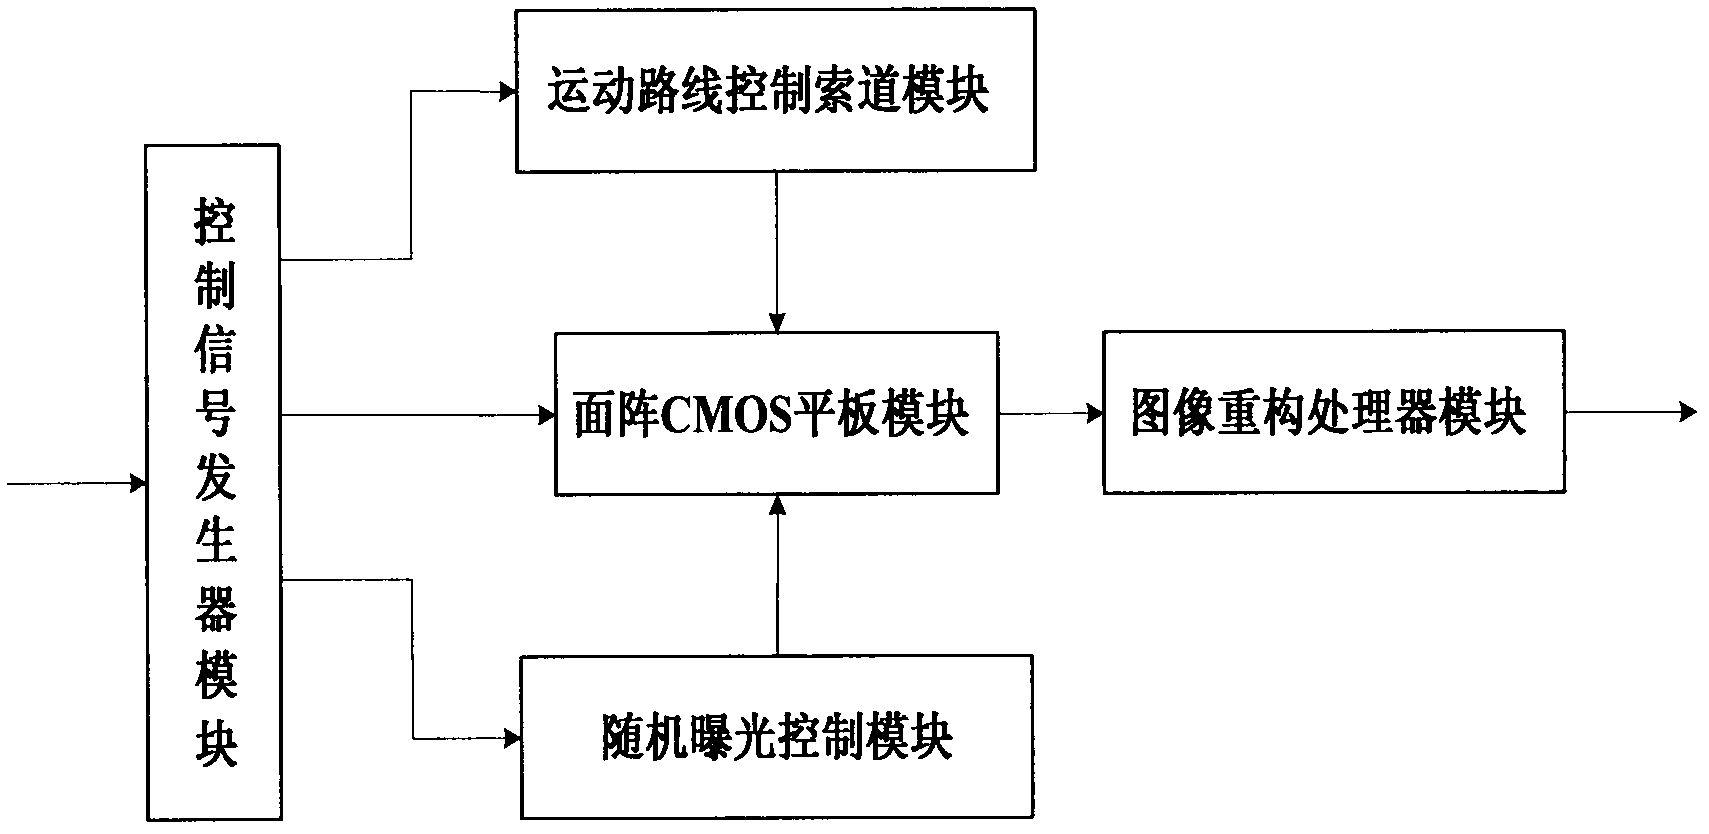 High-resolution imaging system and method based on CMOS-TDI (Complementary Metal Oxide Semiconductor-Time Delay and Integration) mode